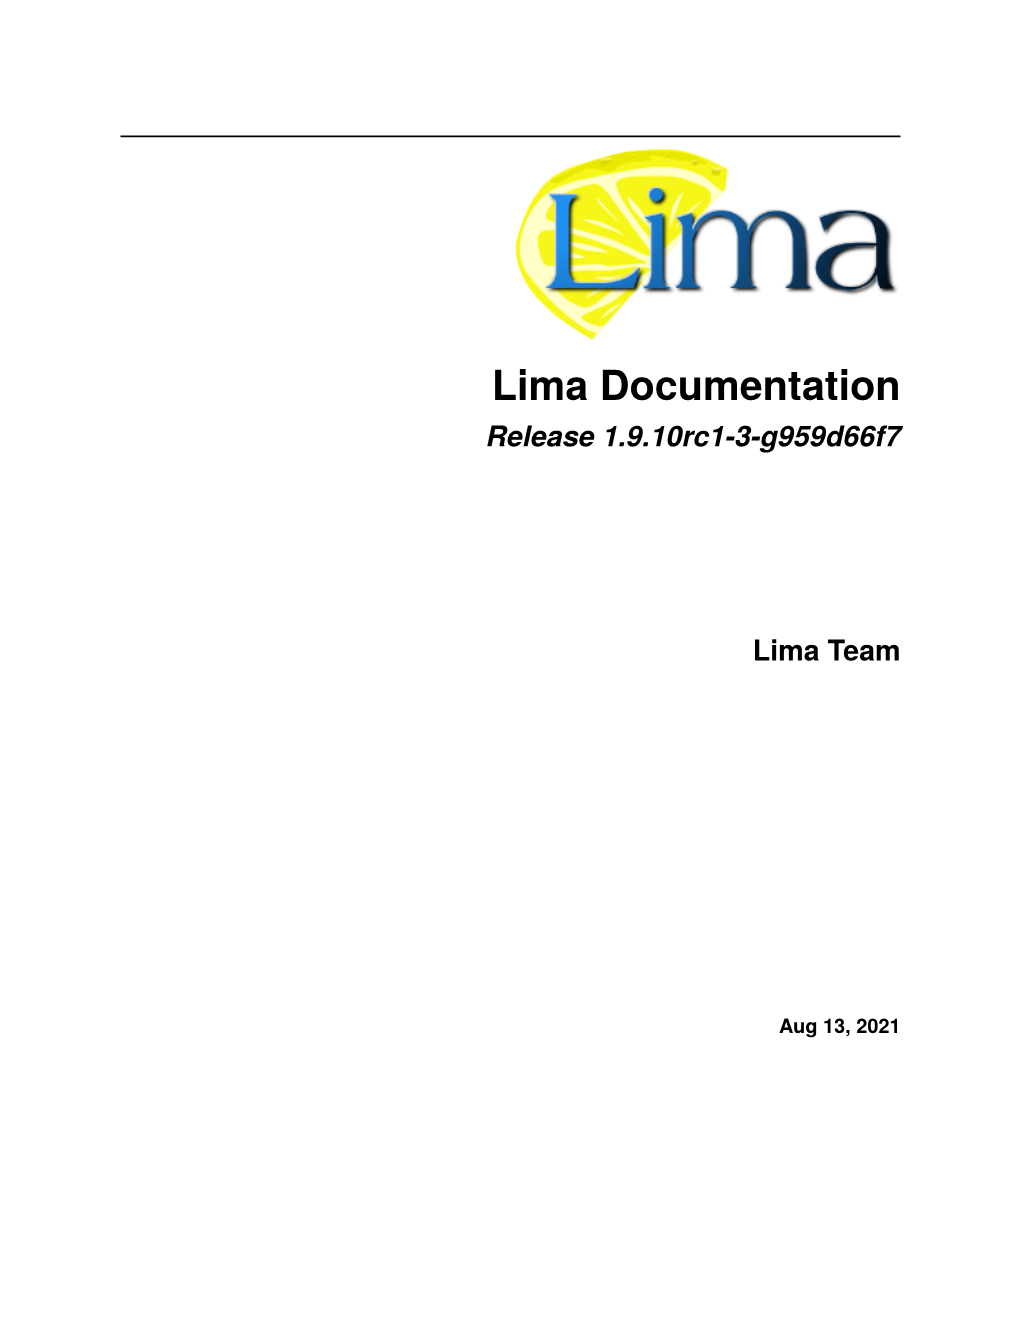 Lima Documentation Release 1.9.10Rc1-3-G959d66f7